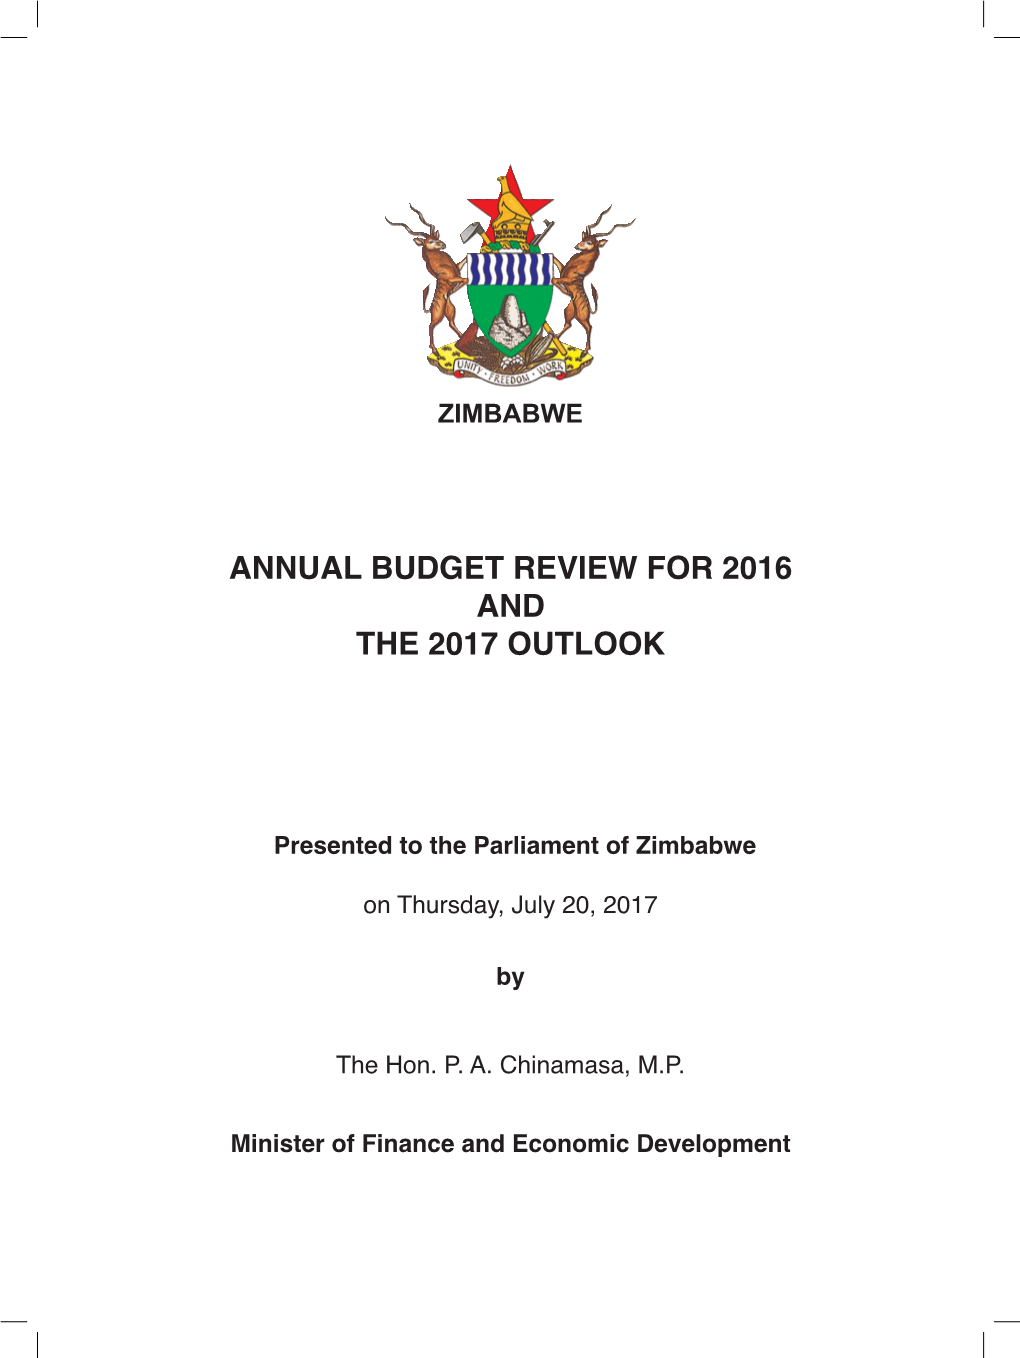 Zimbabwe Annual Budget Review for 2016 and the 2017 Outlook